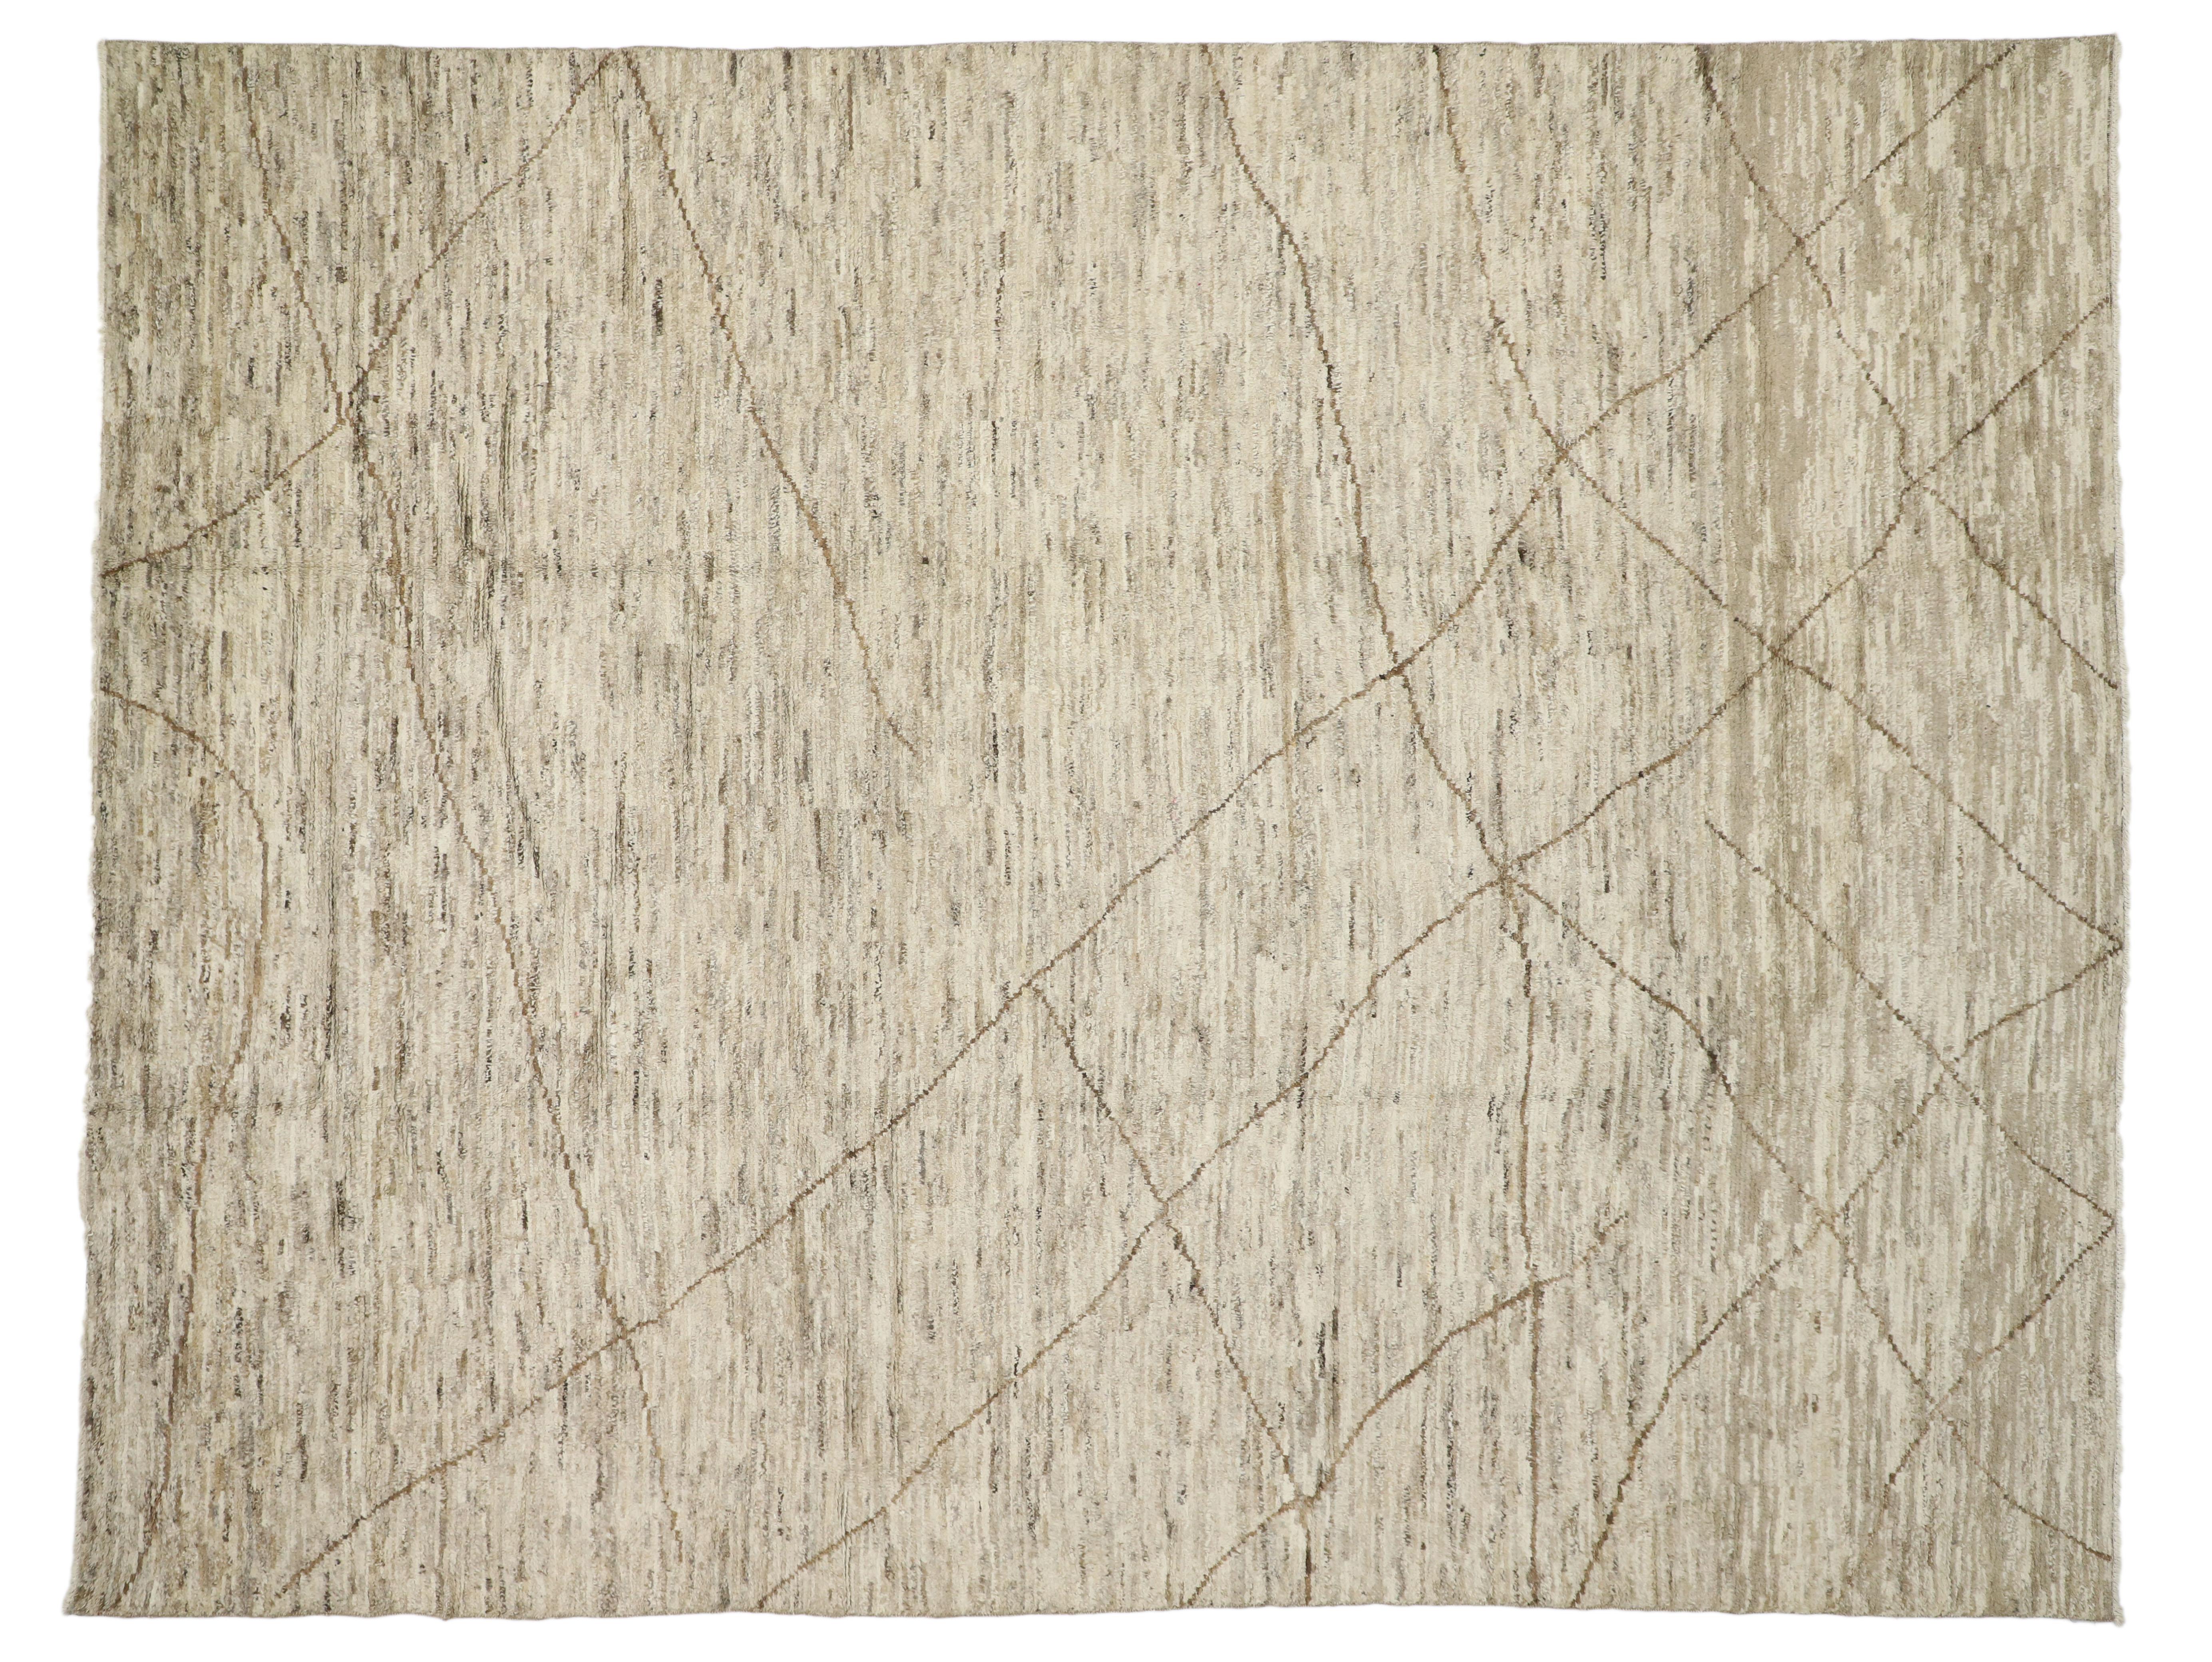 New Contemporary Moroccan Area Rug with Modern Design, Warm Neutral Earth Tones 2